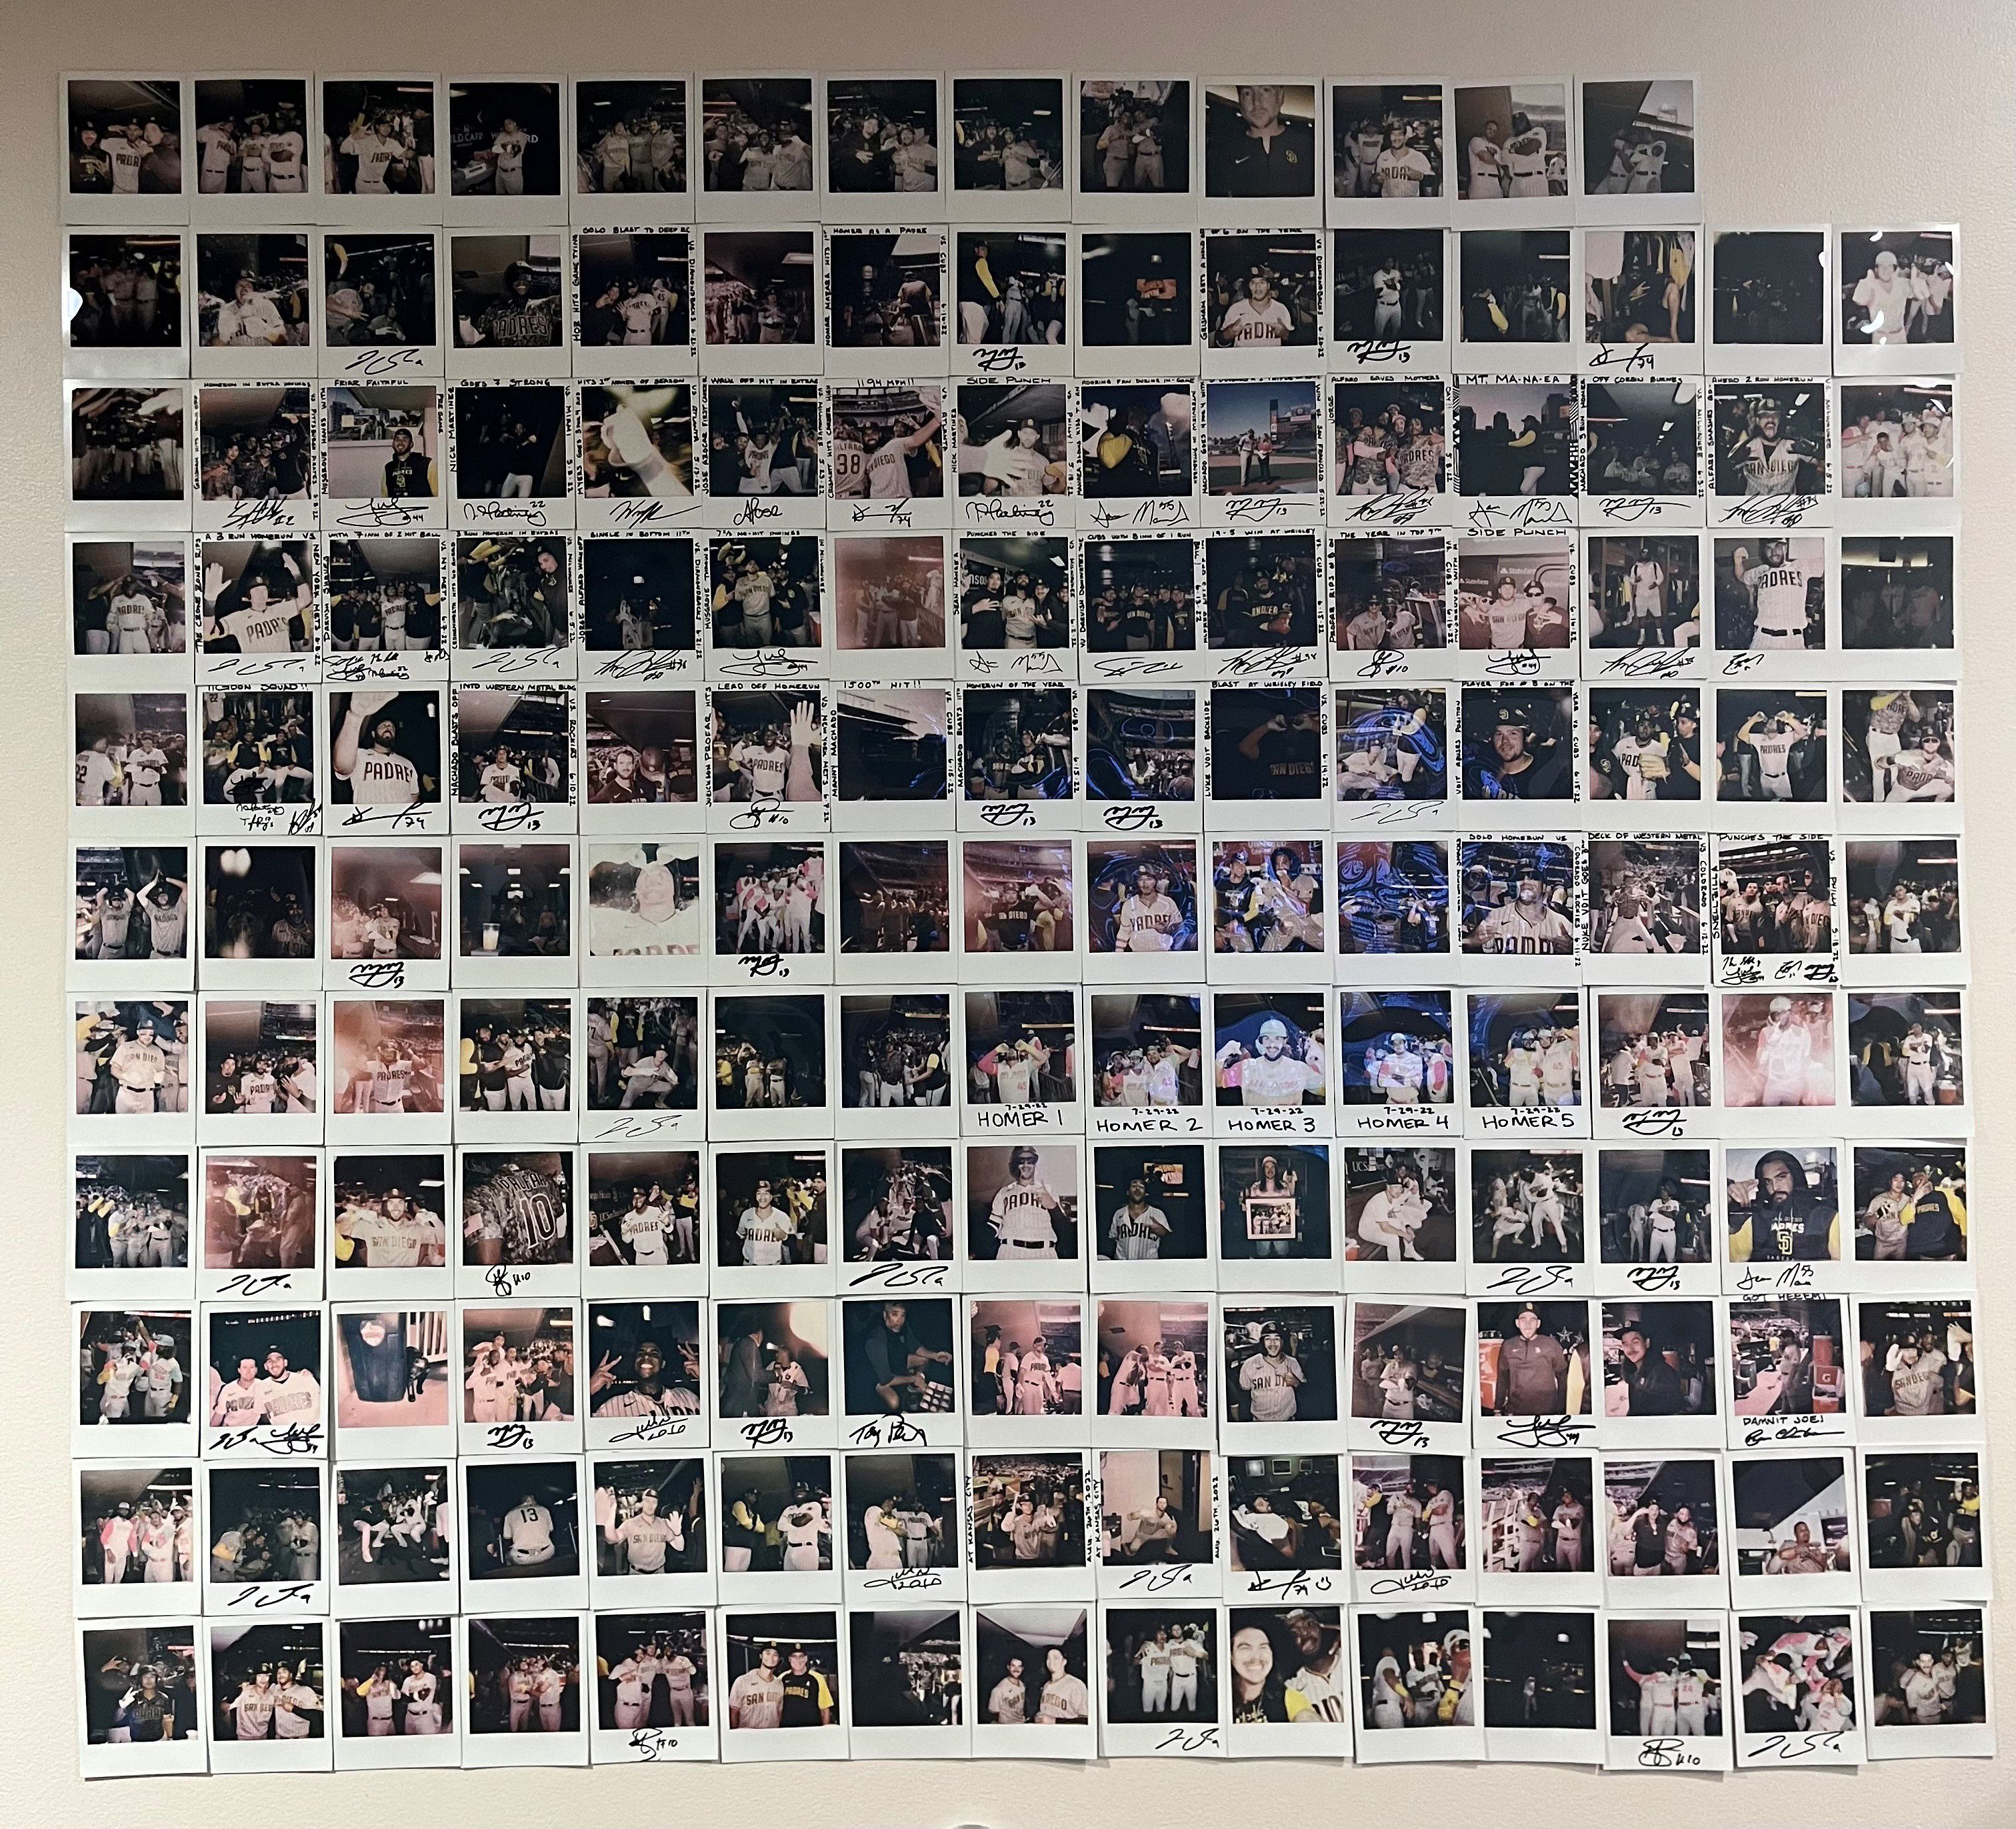 Snapshots and moon shots: Padres' Polaroid tradition continues in NLCS